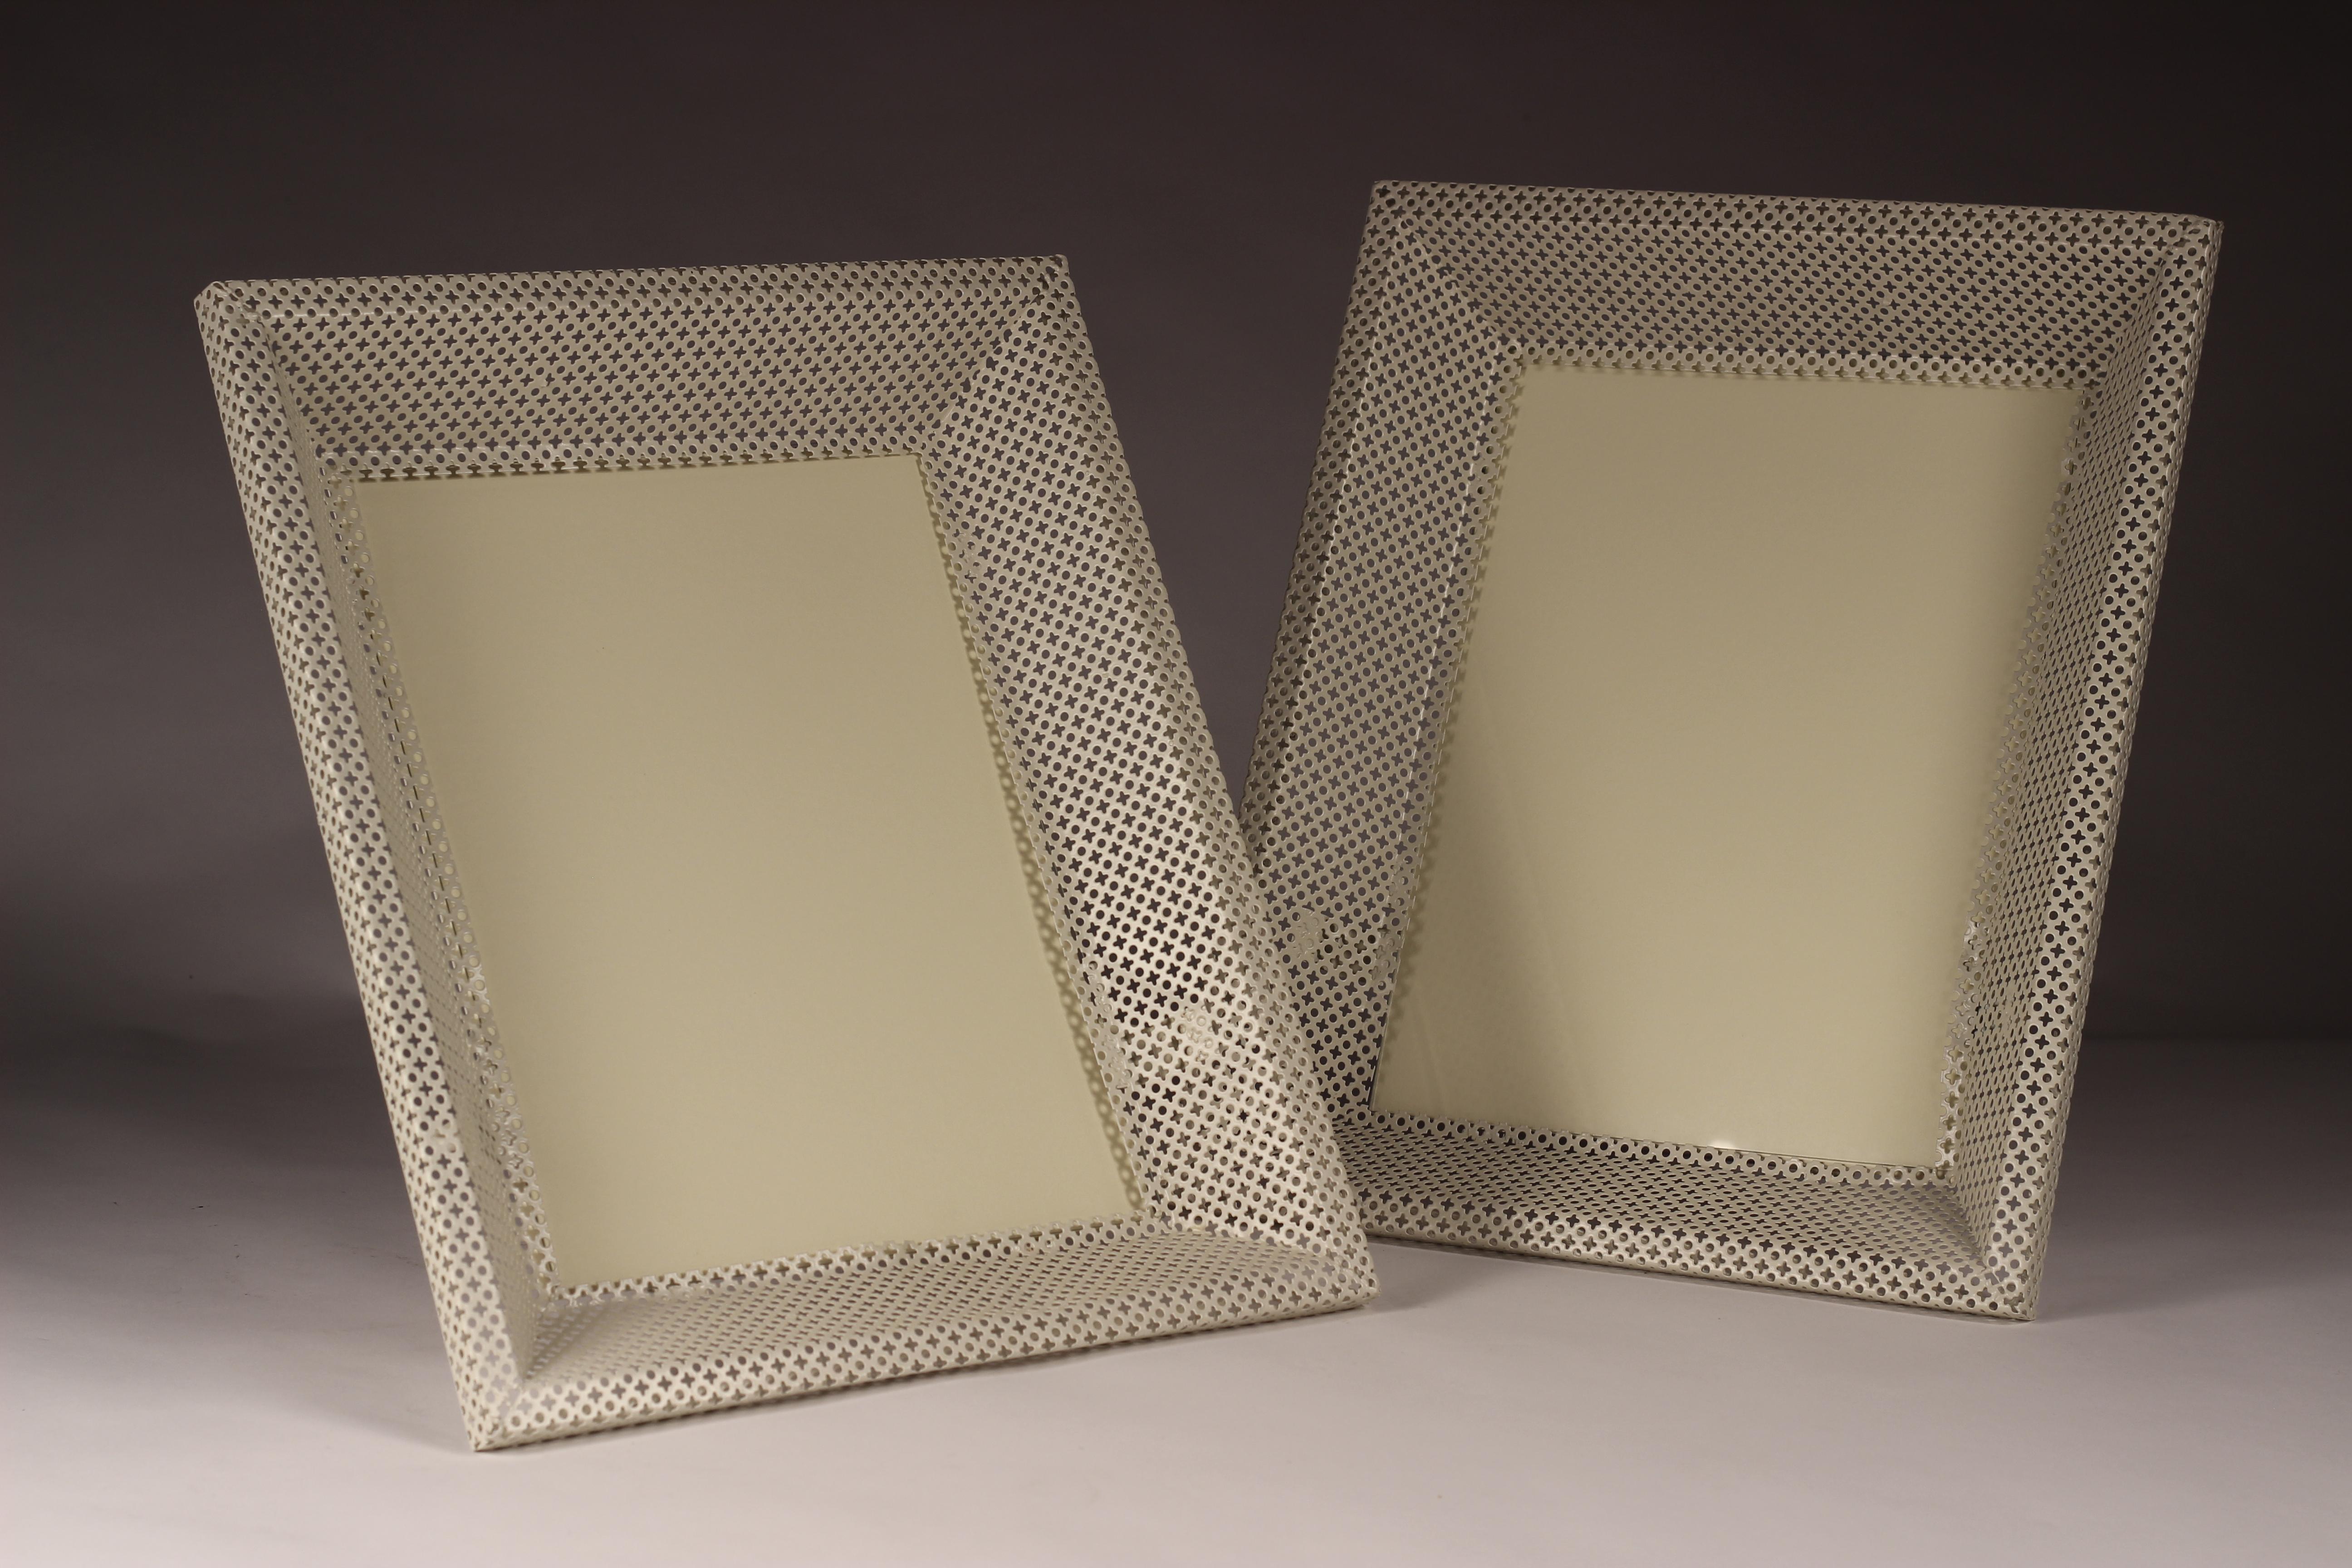 Made in the 1950s of enameled steel perforated in a pattern with Matégot's distinctive trefoil motif, this pair of freestanding picture frames or mirrors are very rare. In restored condition with glass and cardboard inserts. 

Considered one of